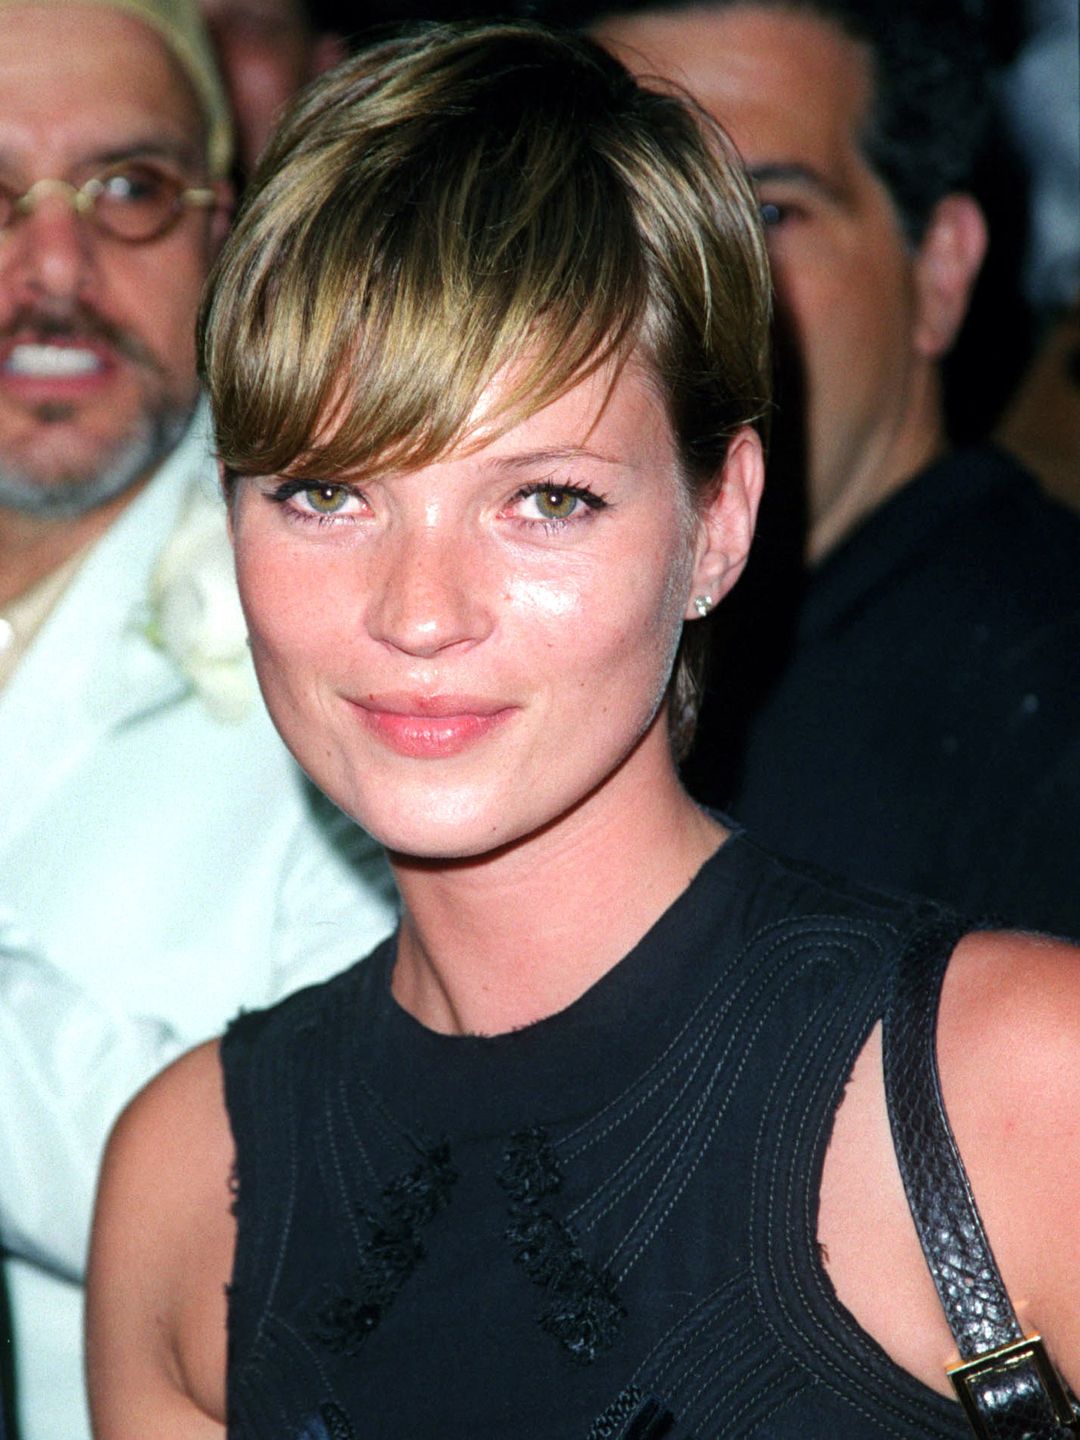 Kate Moss sported an iconic pixie cut earlier in her career